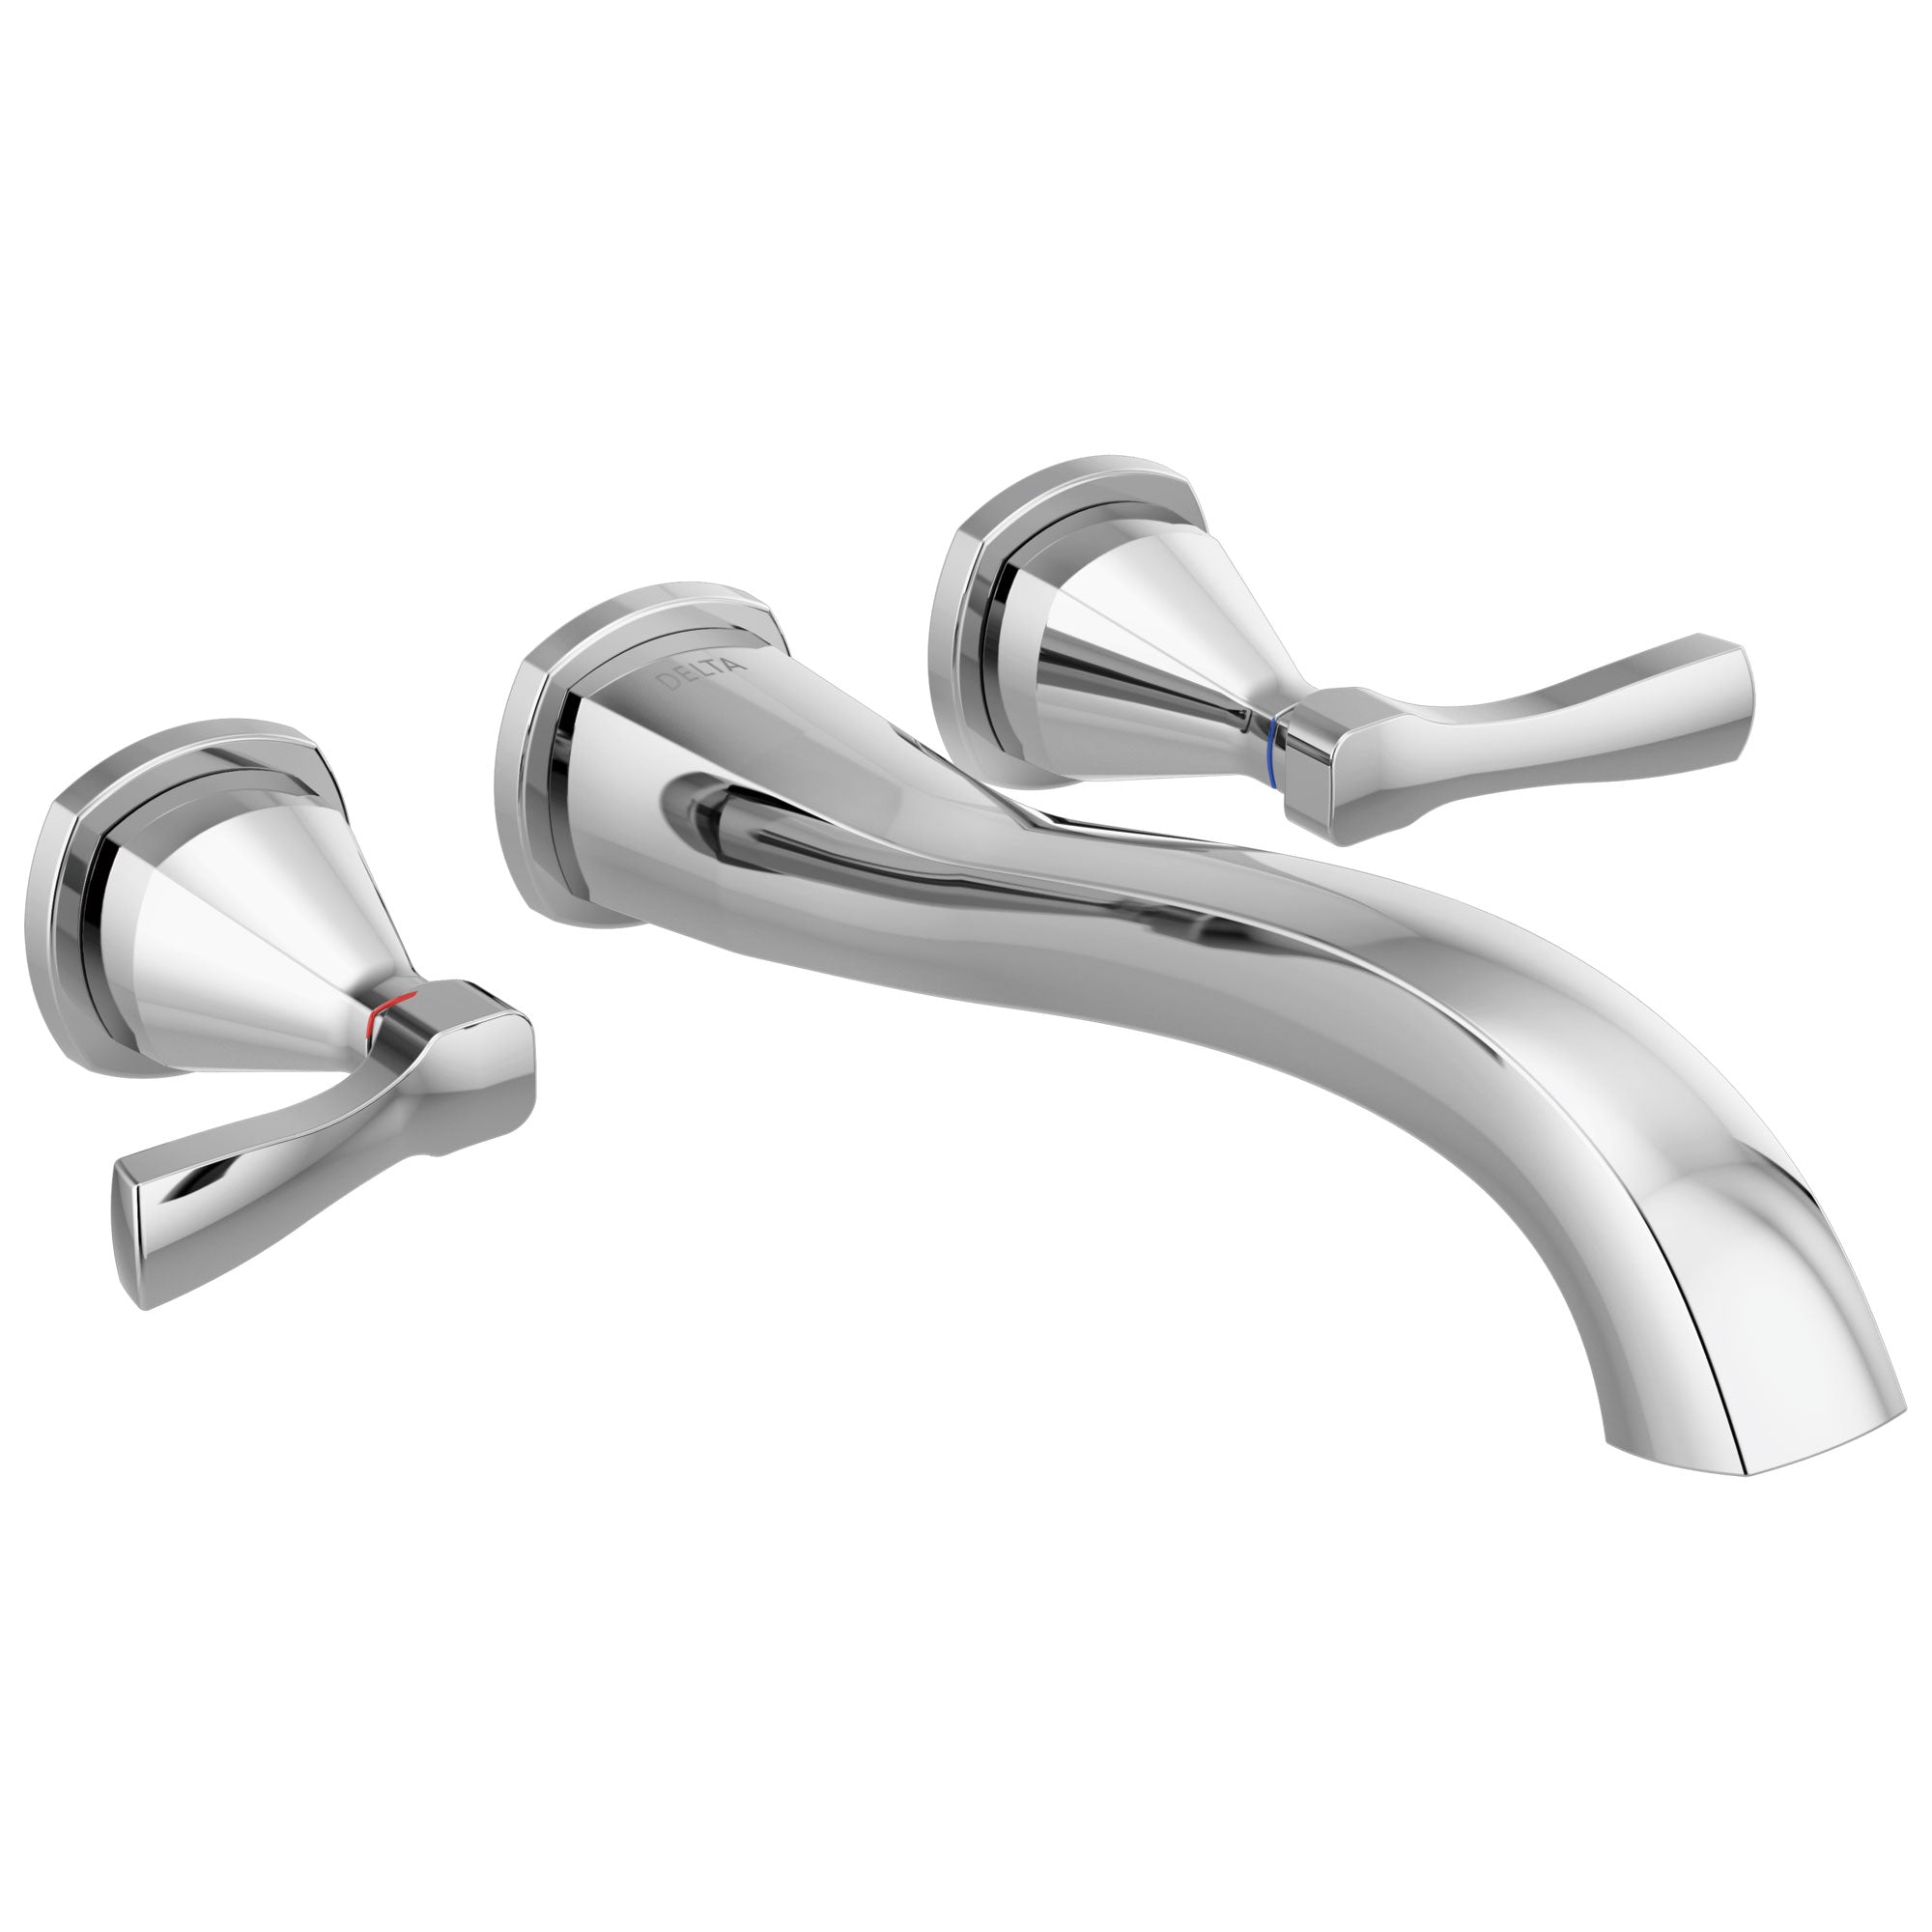 Delta Stryke Chrome Finish 2 Lever Handle Wall Mounted Tub Filler Faucet Includes Rough-in Valve D3013V